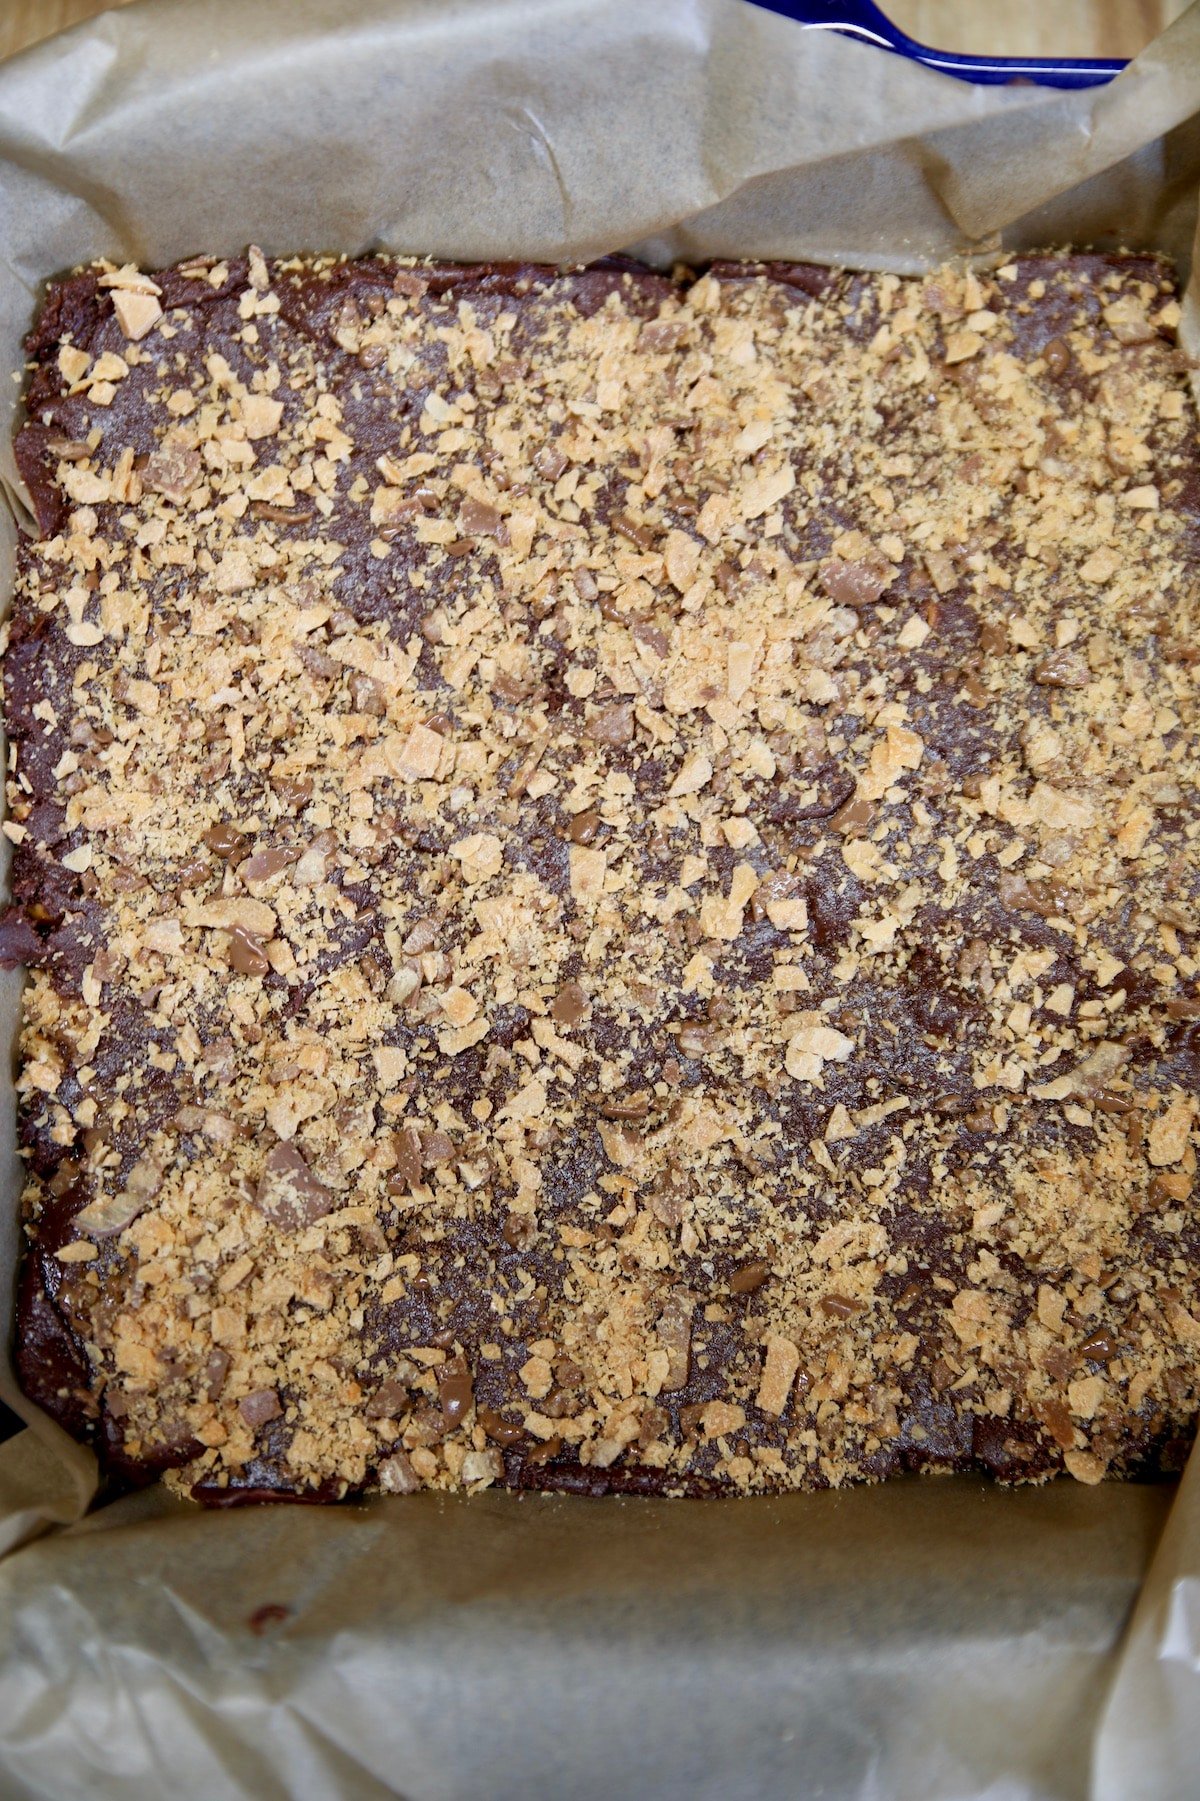 Chocolate fudge with crushed Butterfingers in a square pan.